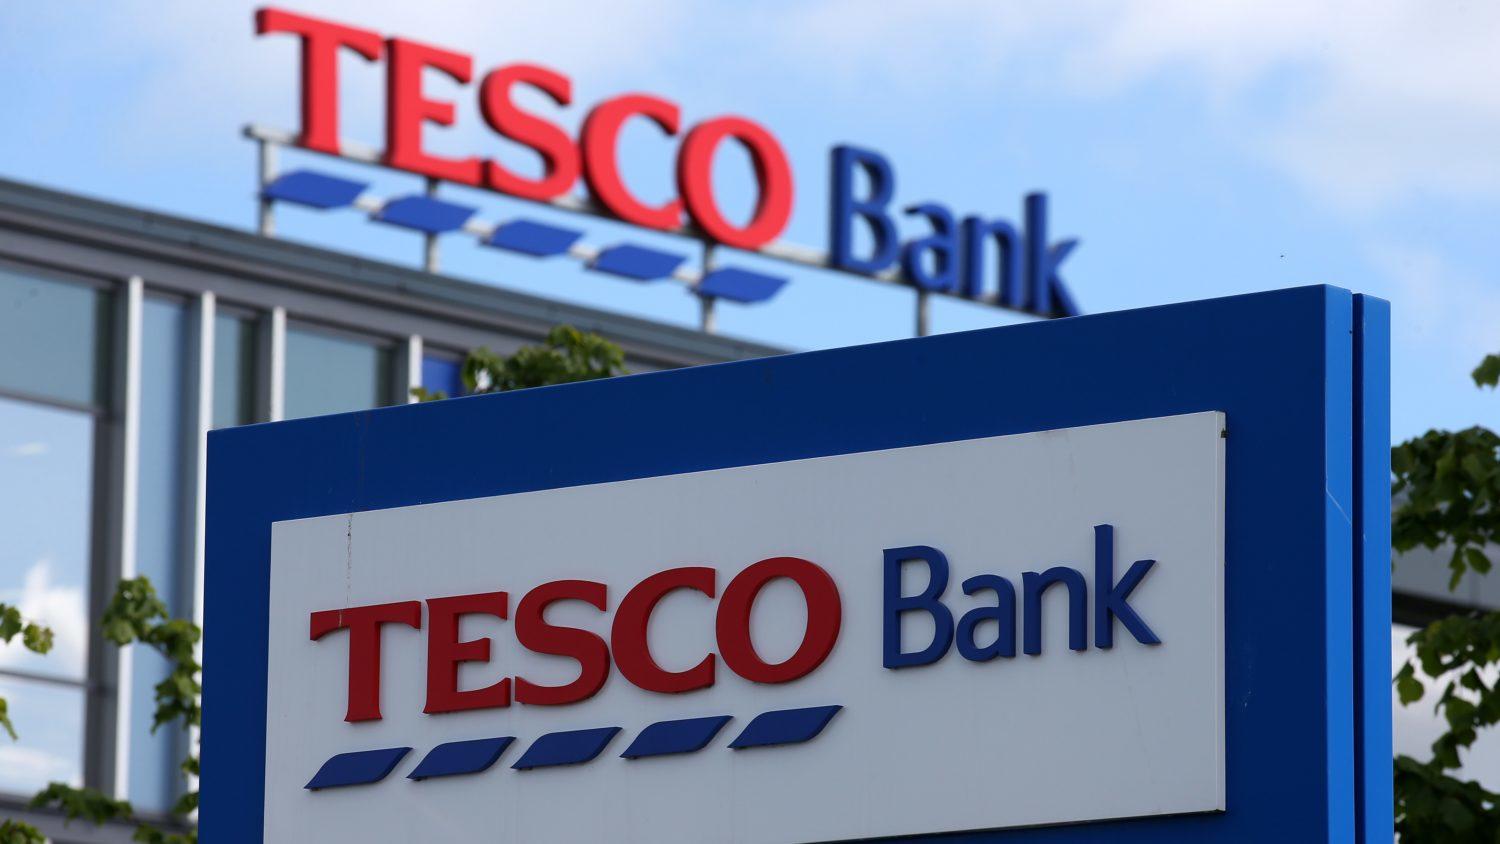 Tesco Bank creates 120 new jobs as part of investment